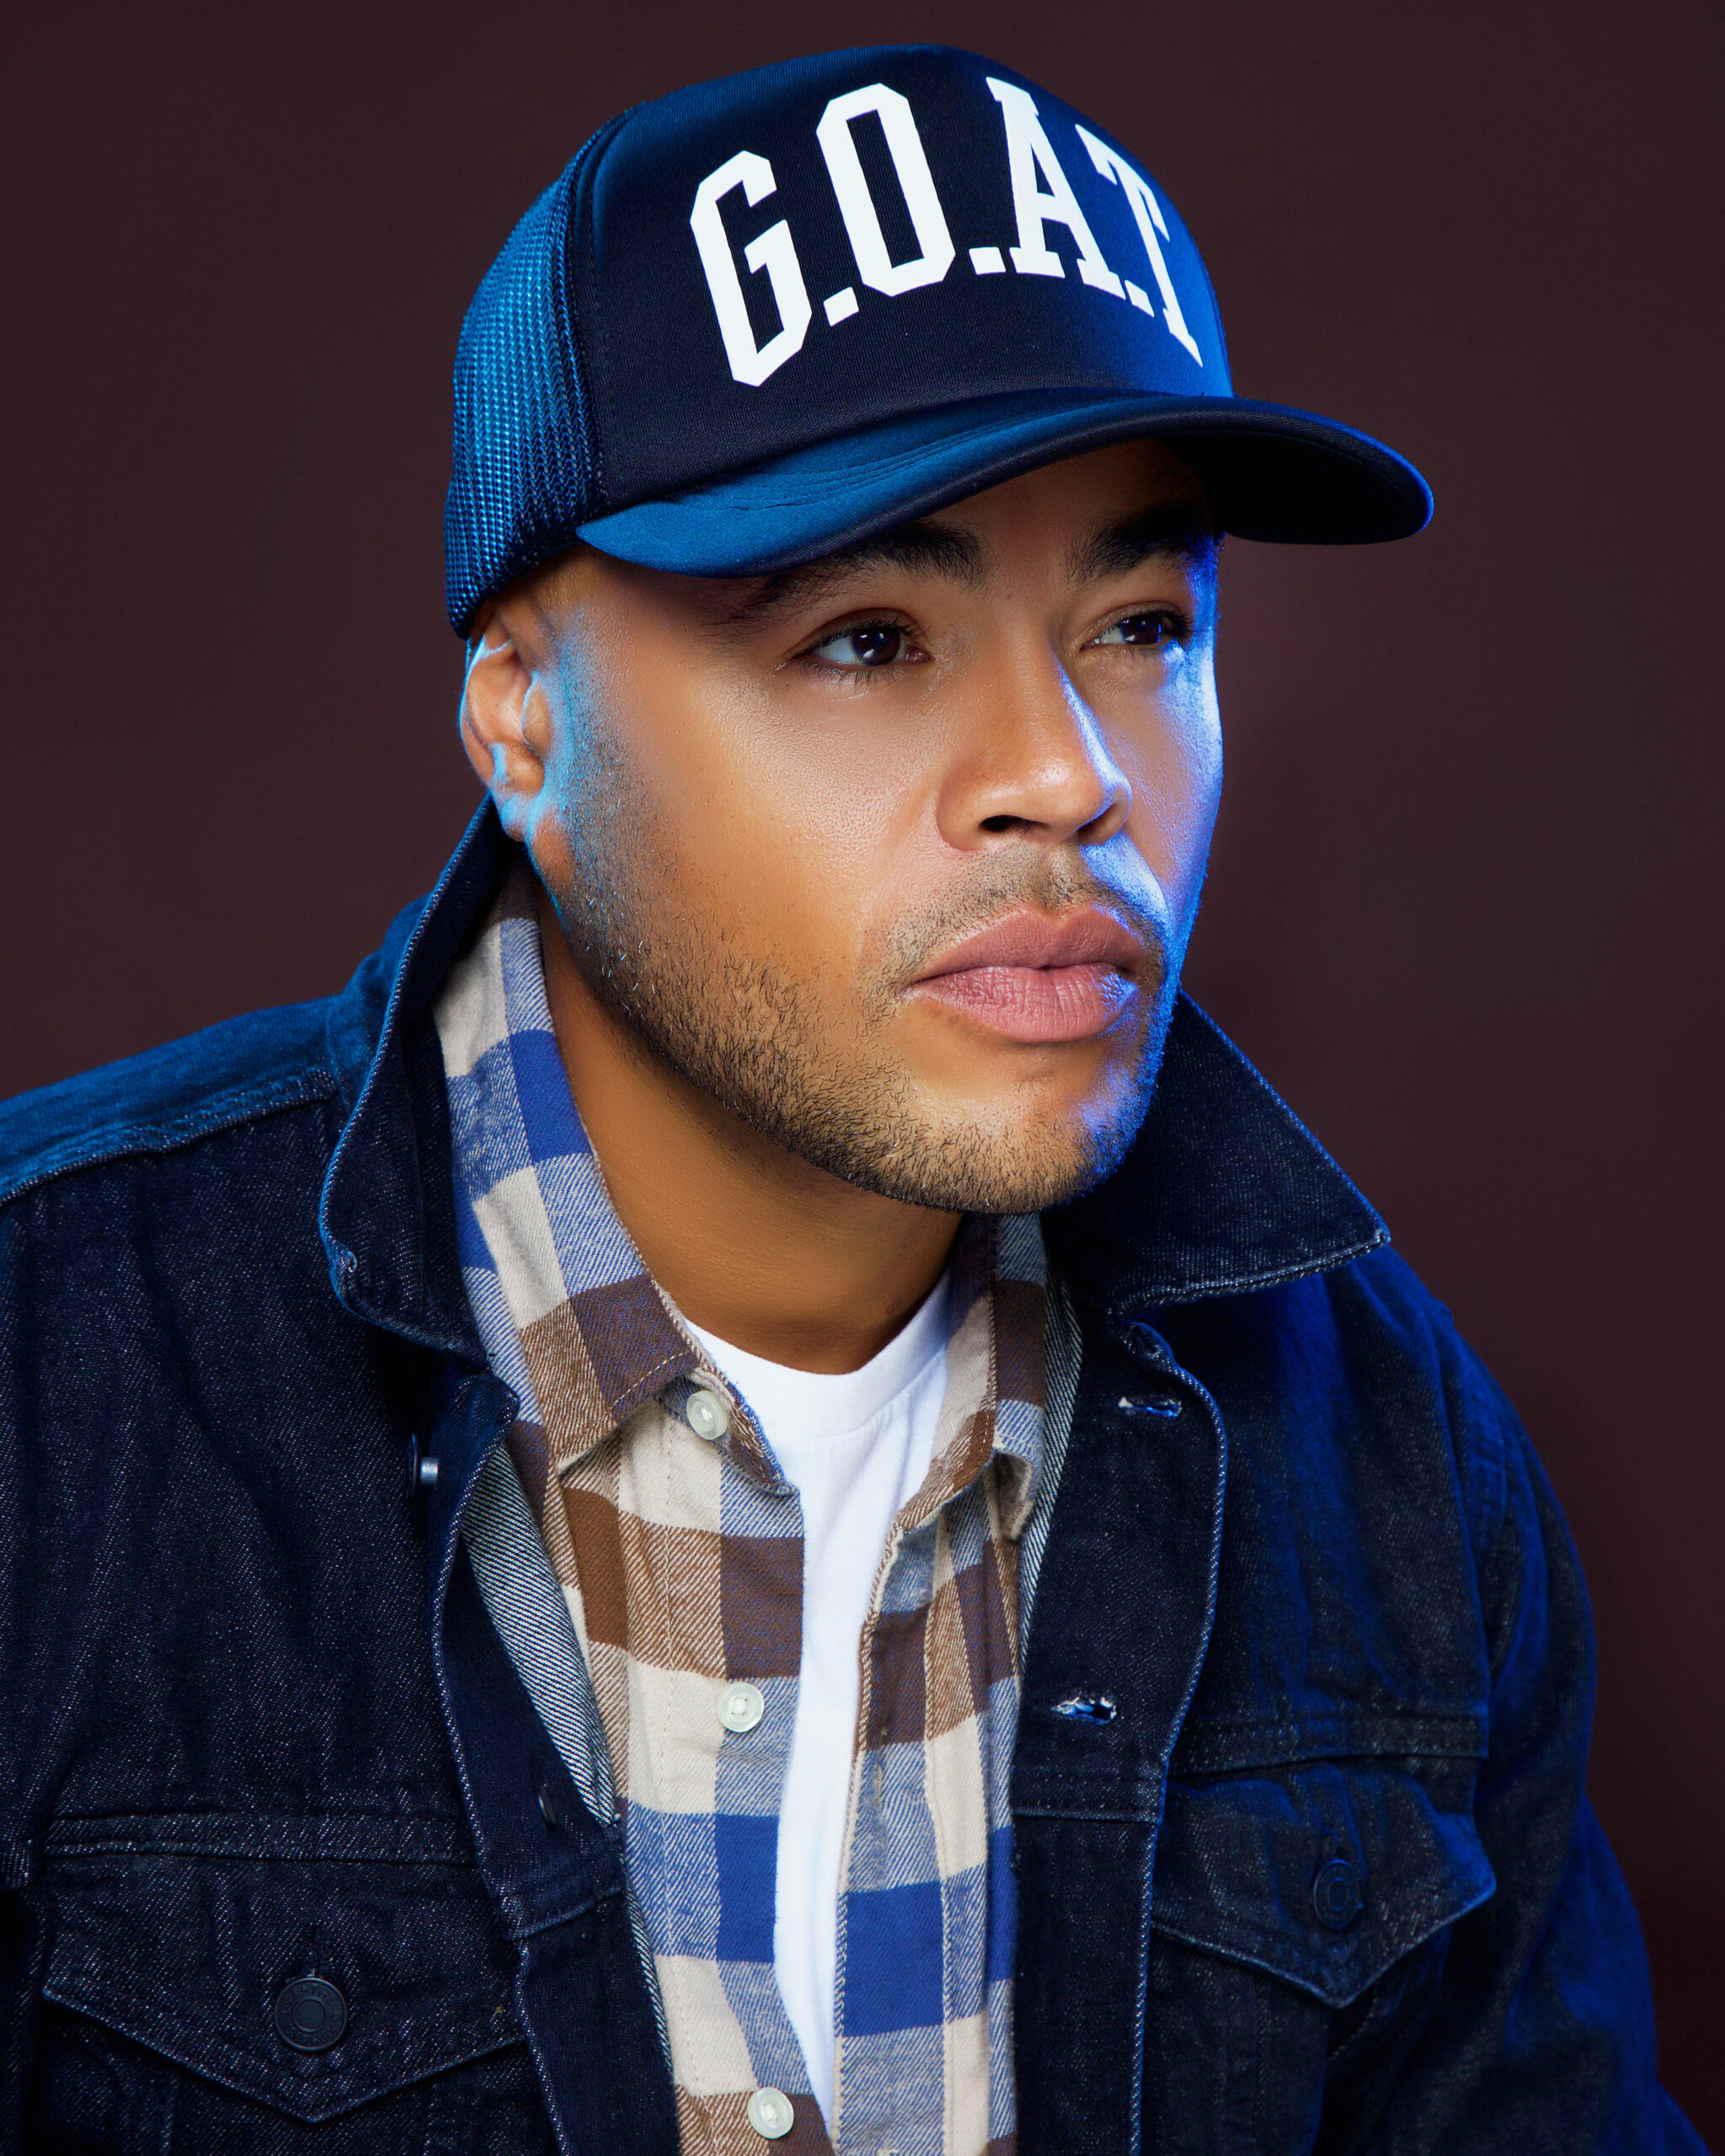 Headshot of D. O. Gibson. Gibson wears a blue hat that says “G.O.A.T.” and a blue plaid shirt against a black backdrop.